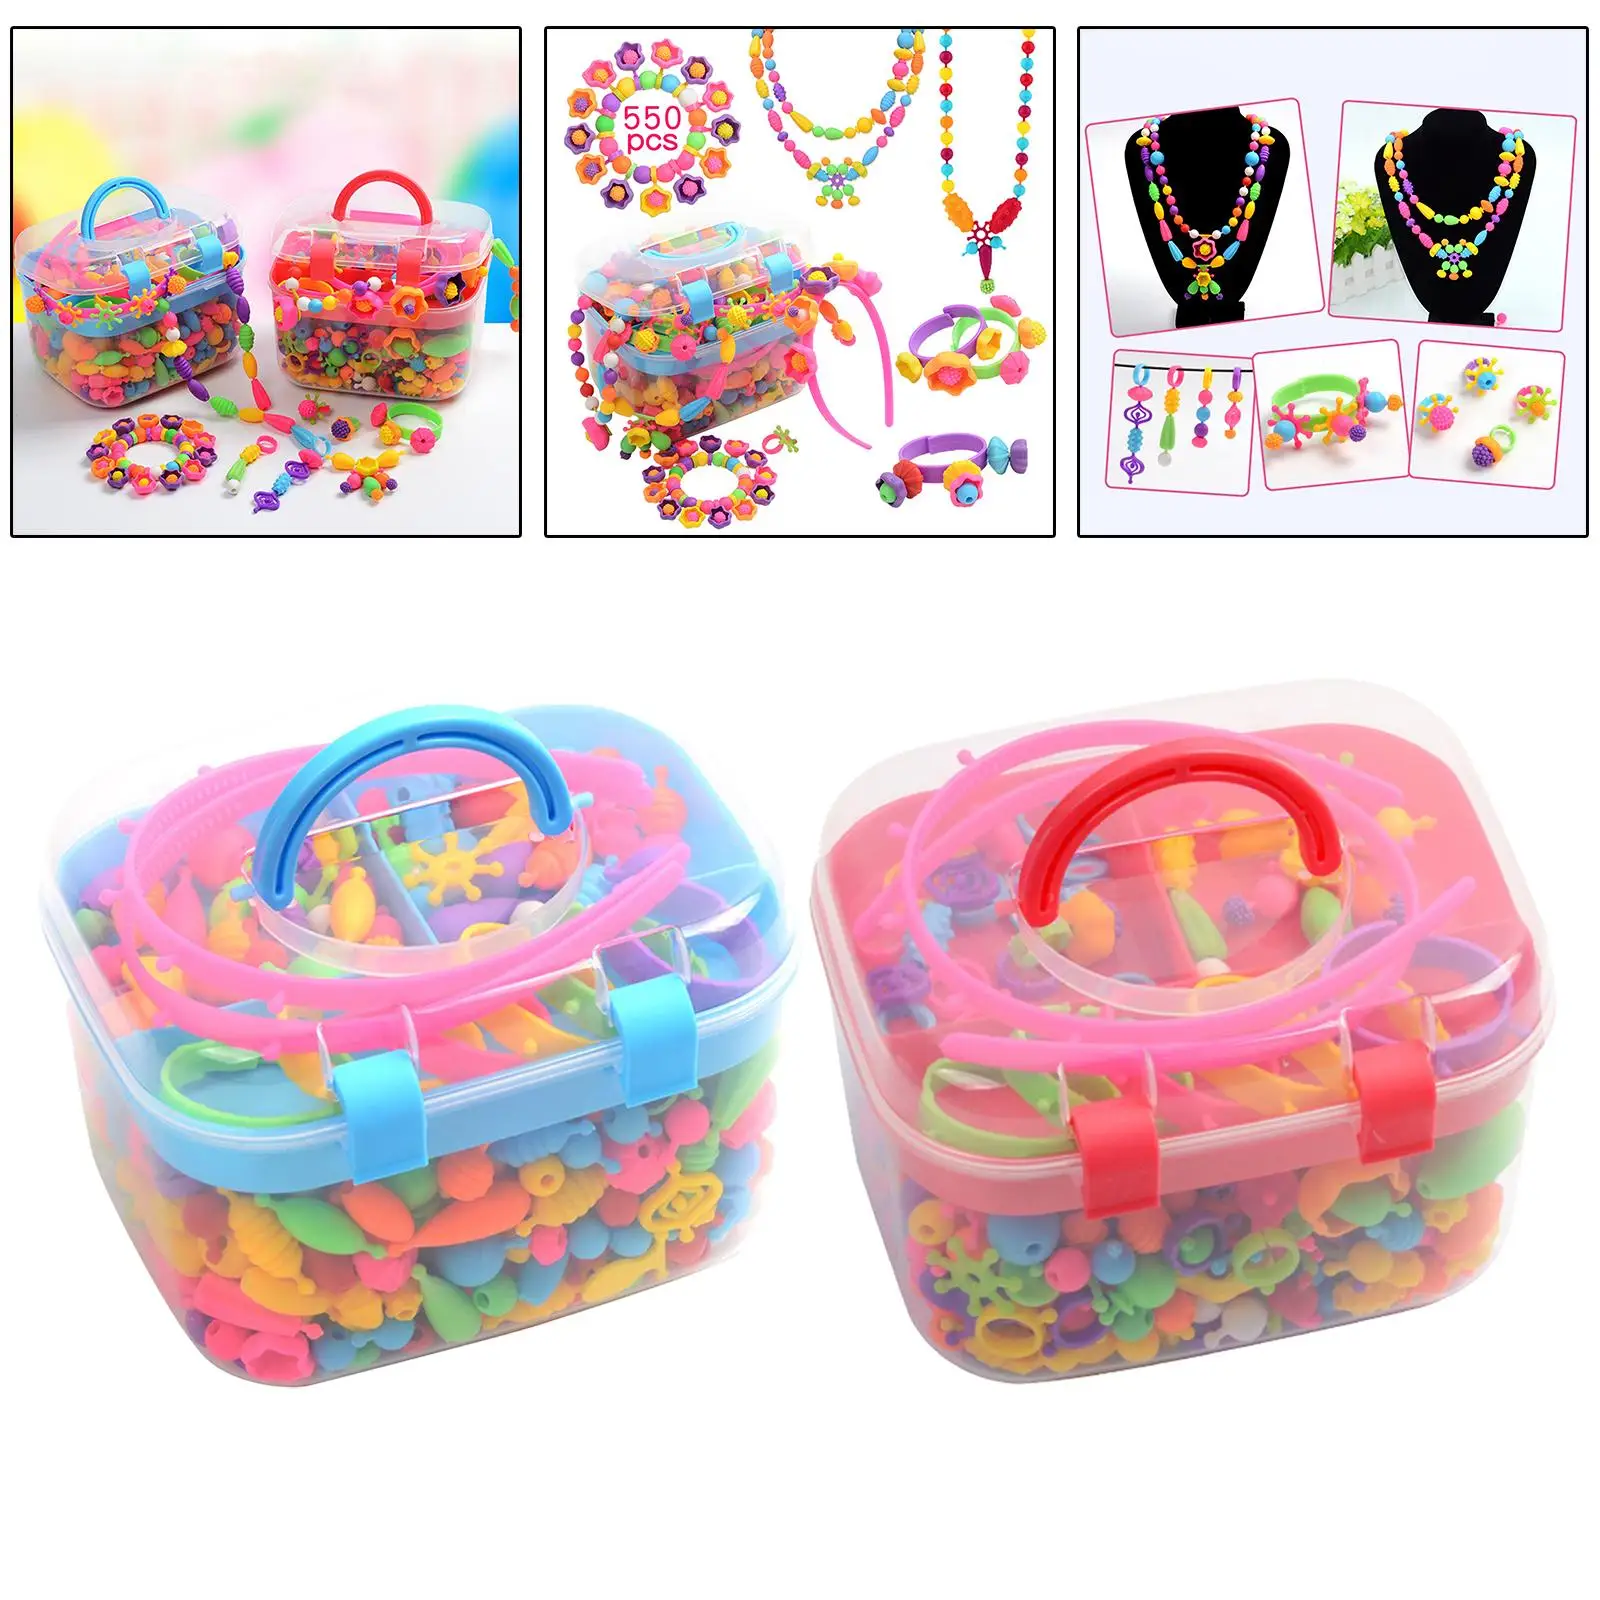 rcstronger 550Pcs Beads Jewelry Making Crafts for Necklace Girls